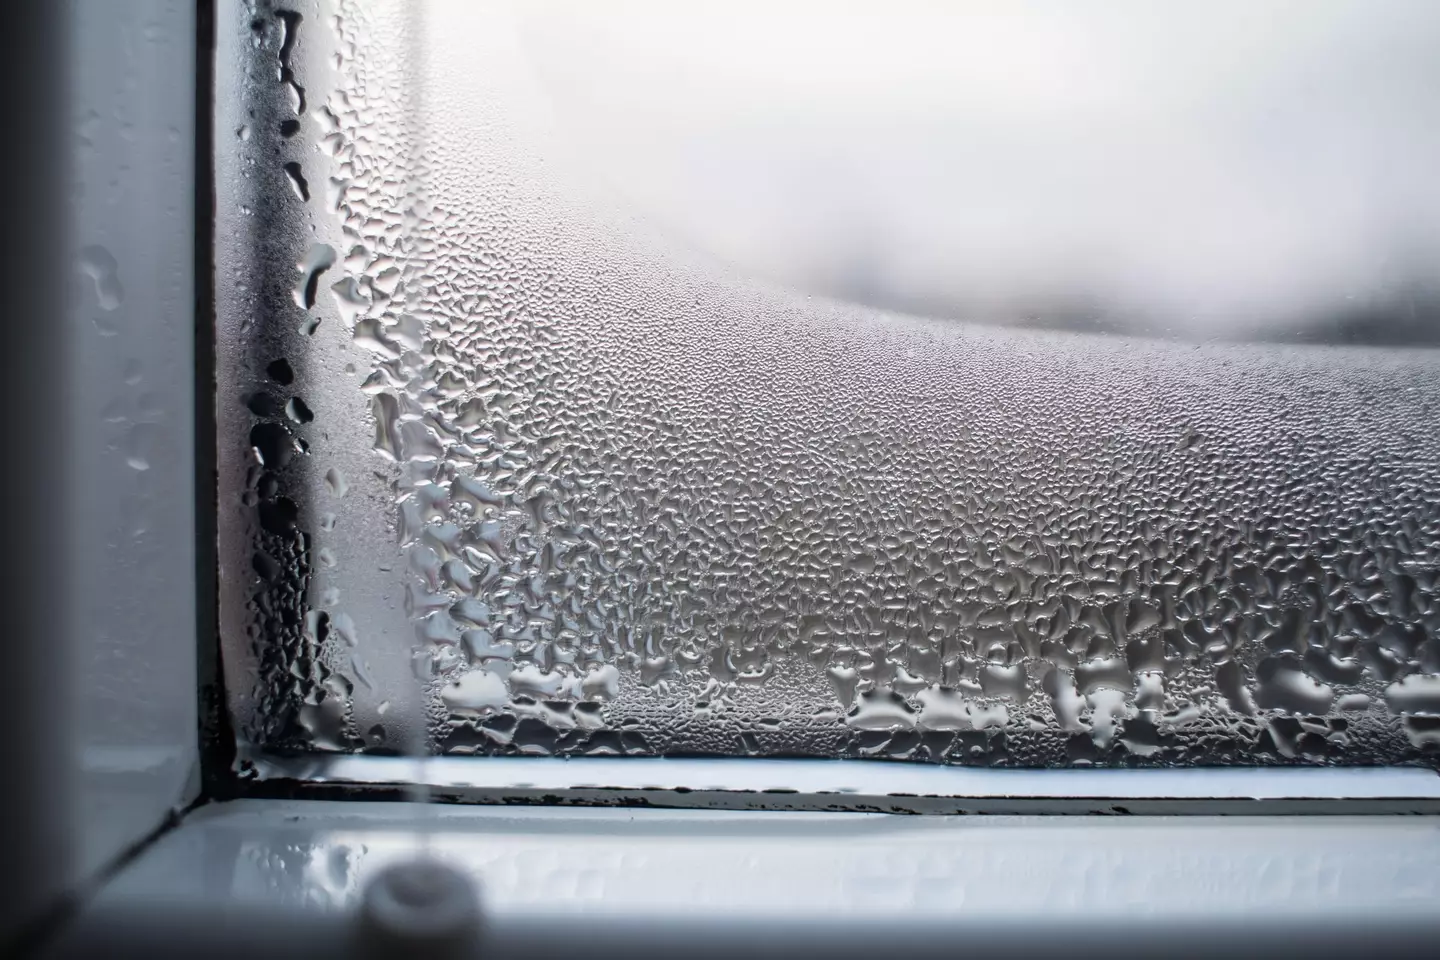 Condensation can lead to damp and mouldy conditions.